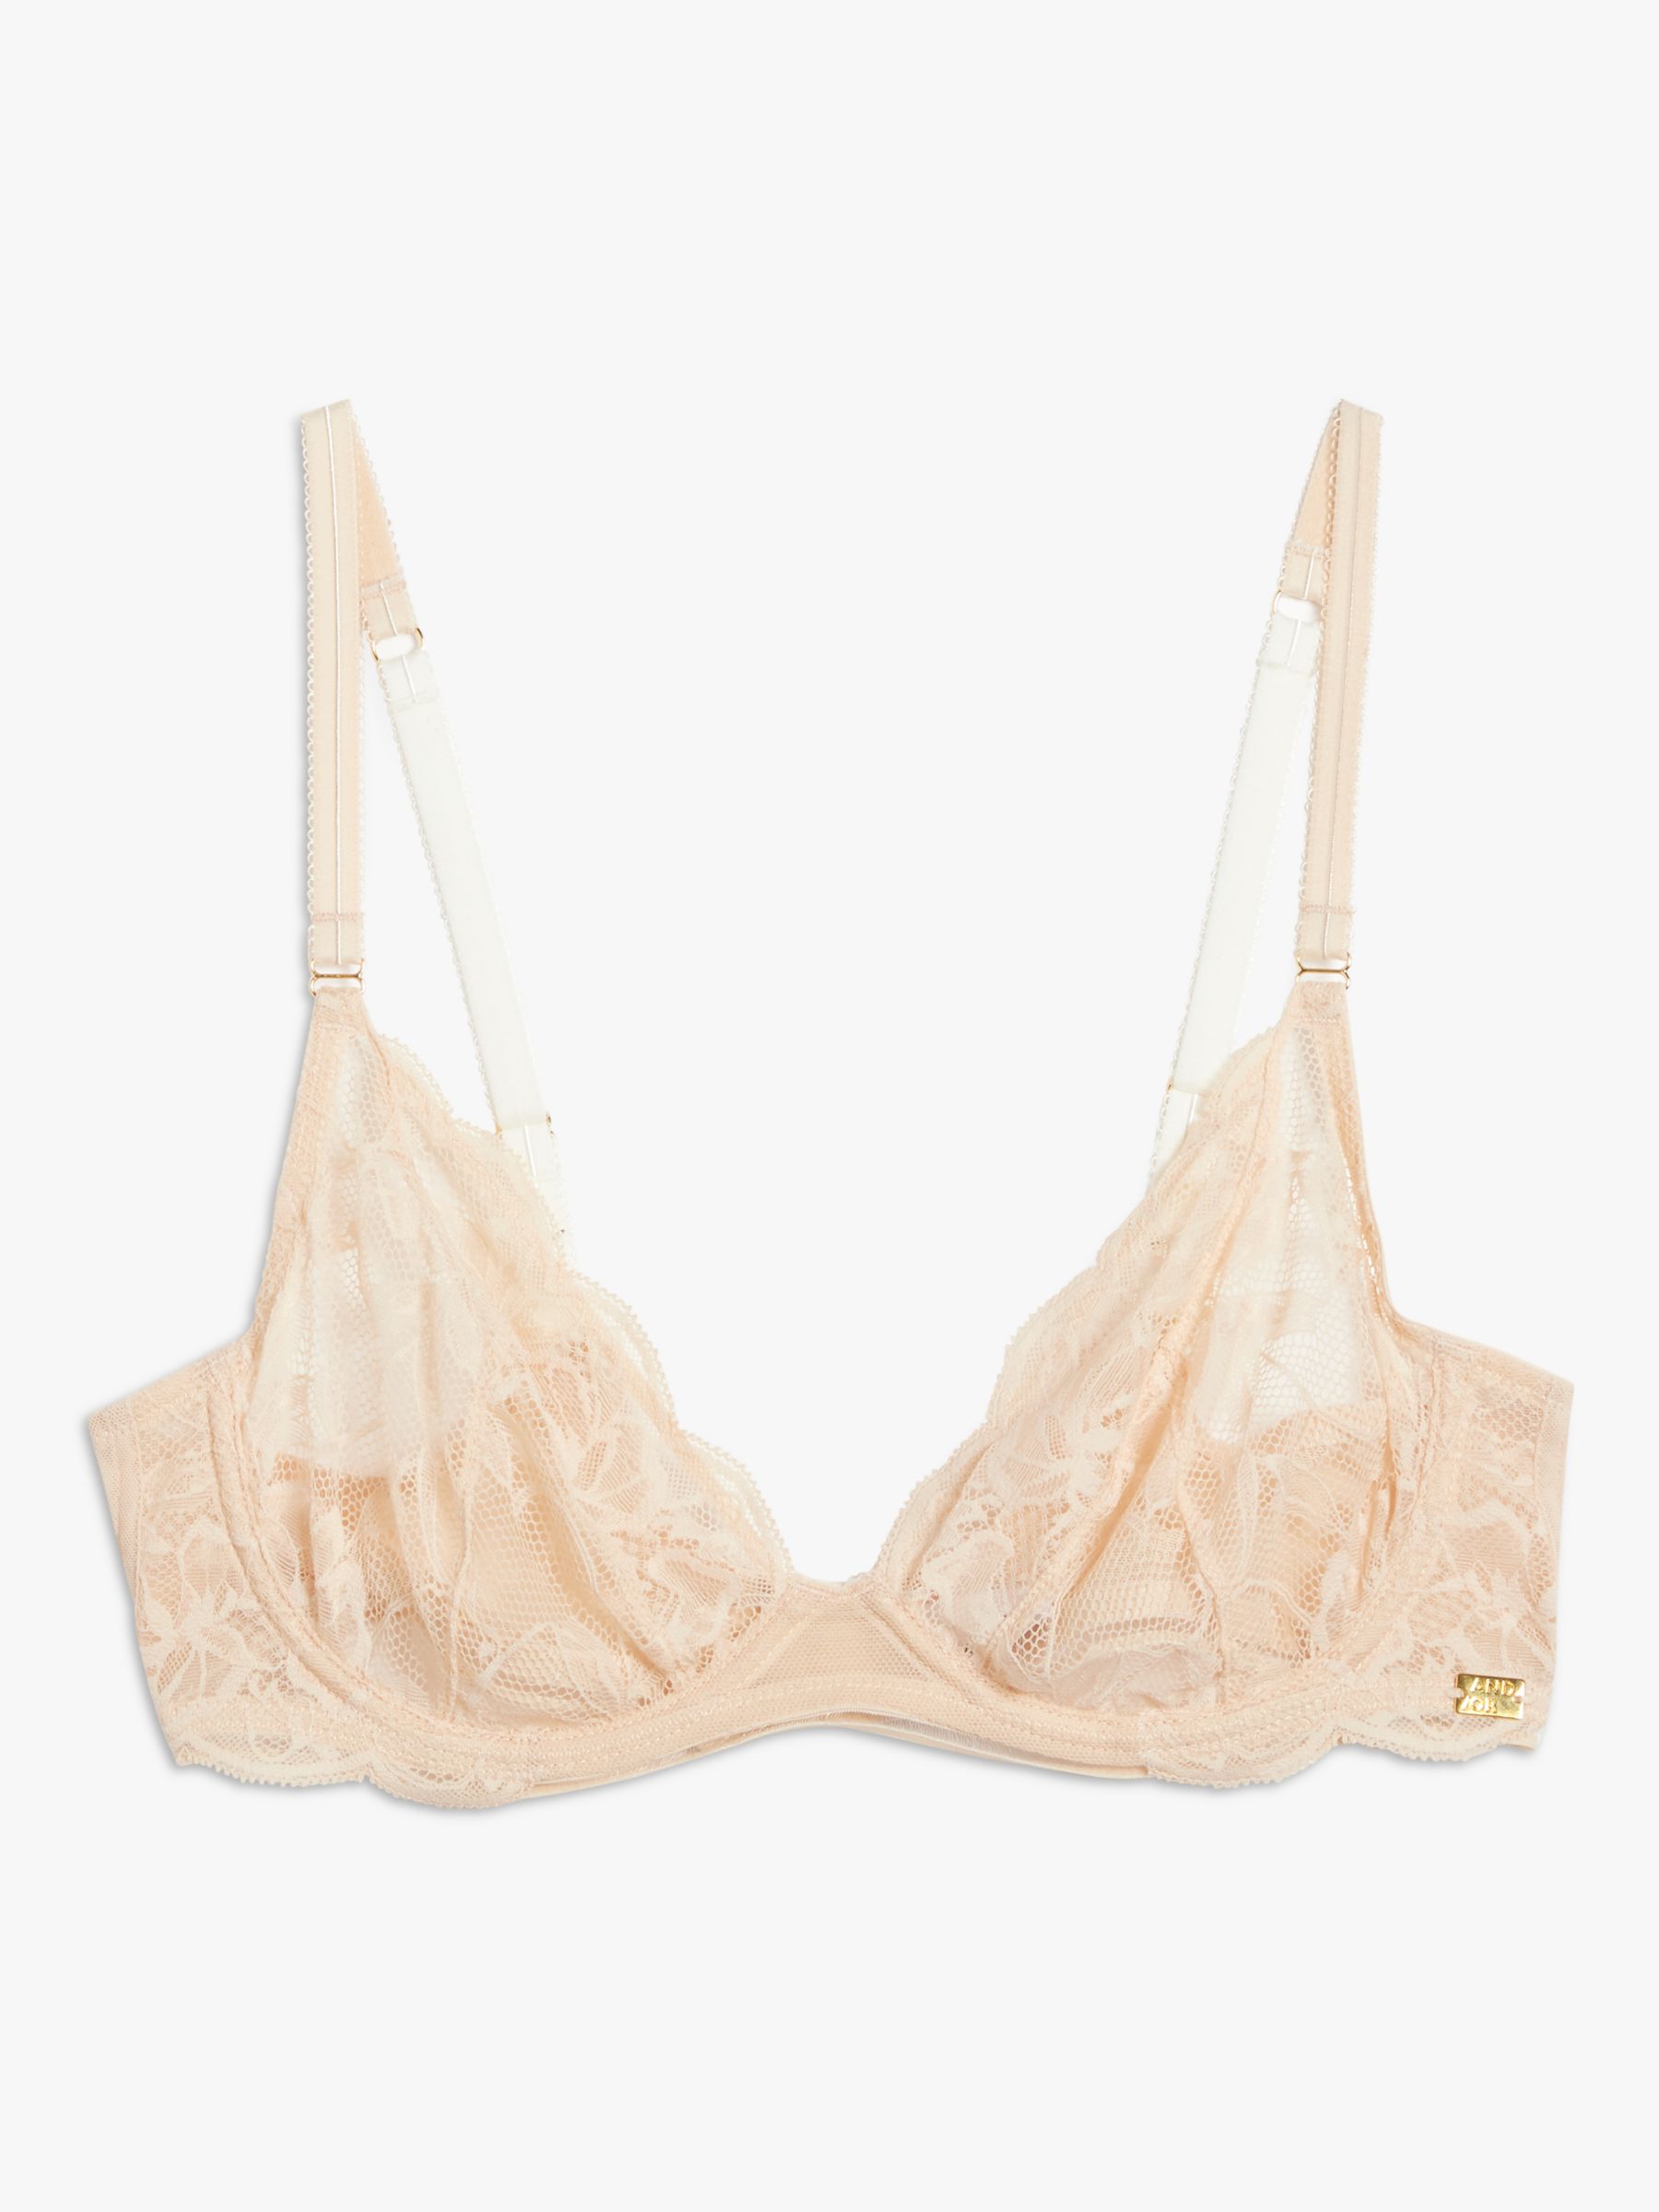 Buy AND/OR Wren Non Padded Balcony Bra, B-DD Cup Sizes Online at johnlewis.com